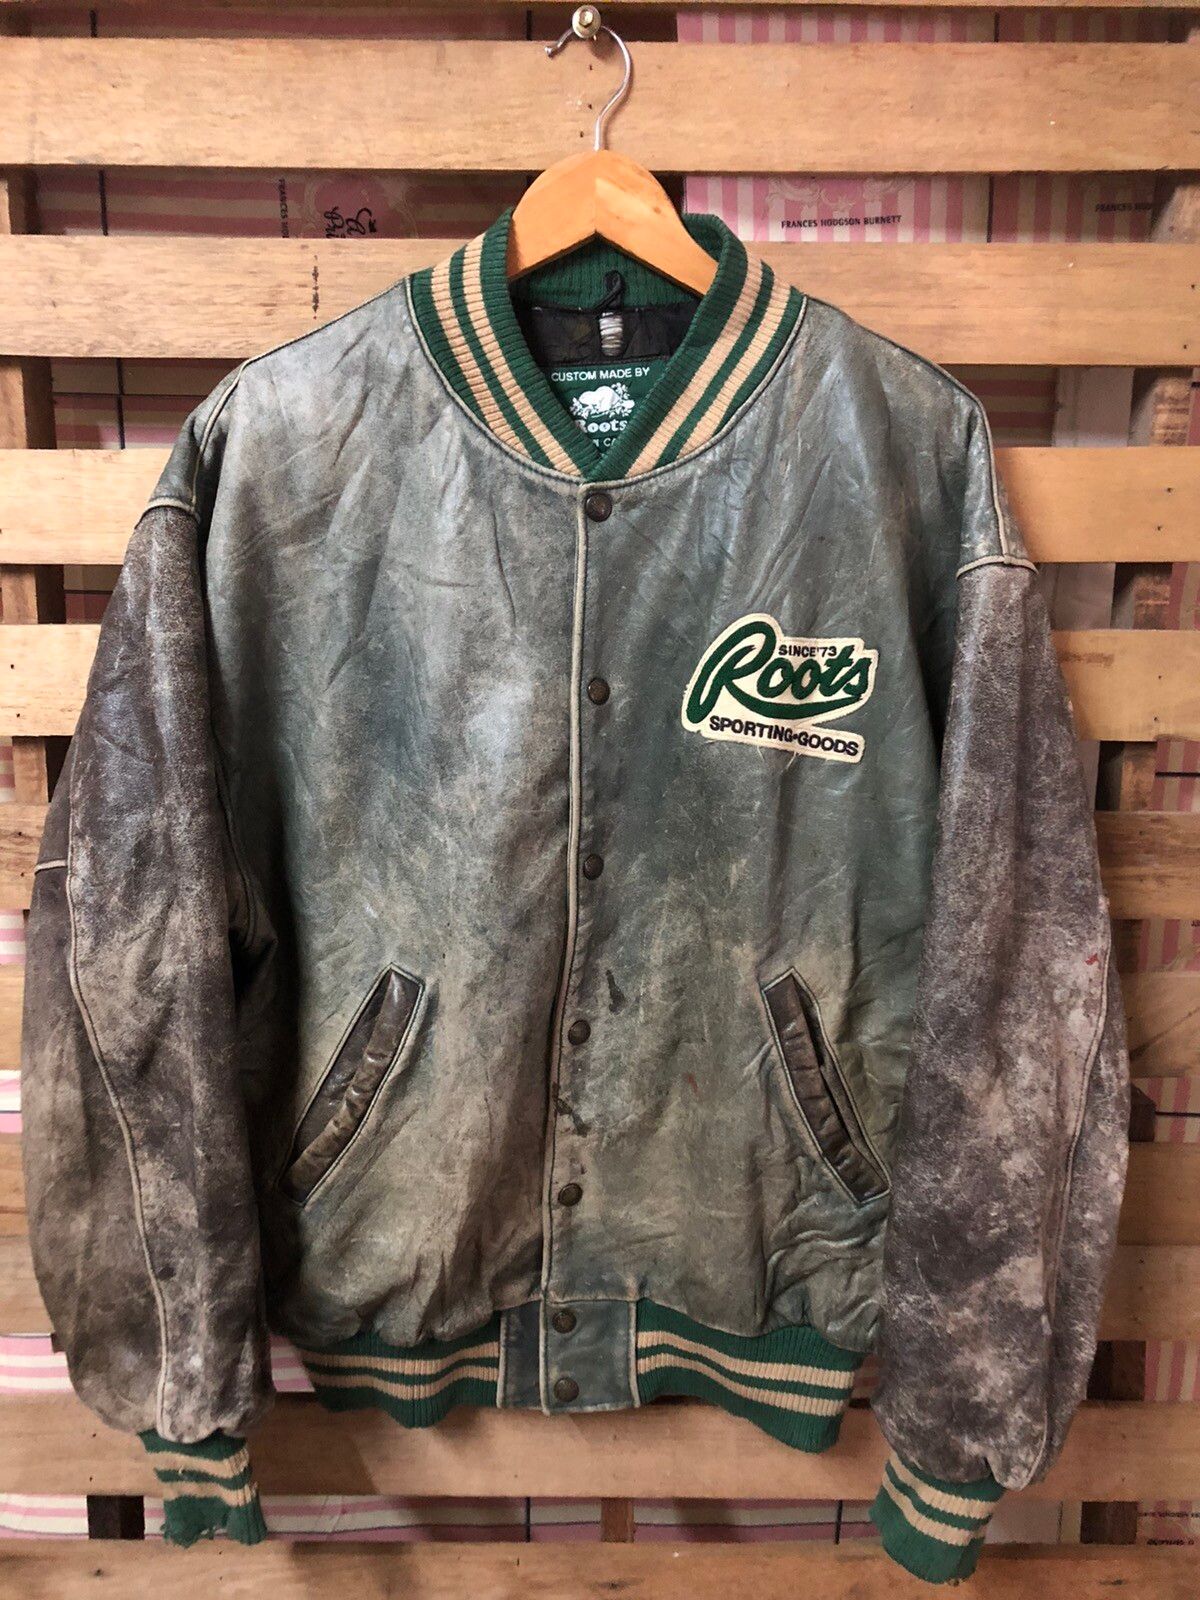 Sports Specialties - Vintage 70s Root’s Sporting Ford Varsity Jacket Distressed - 1